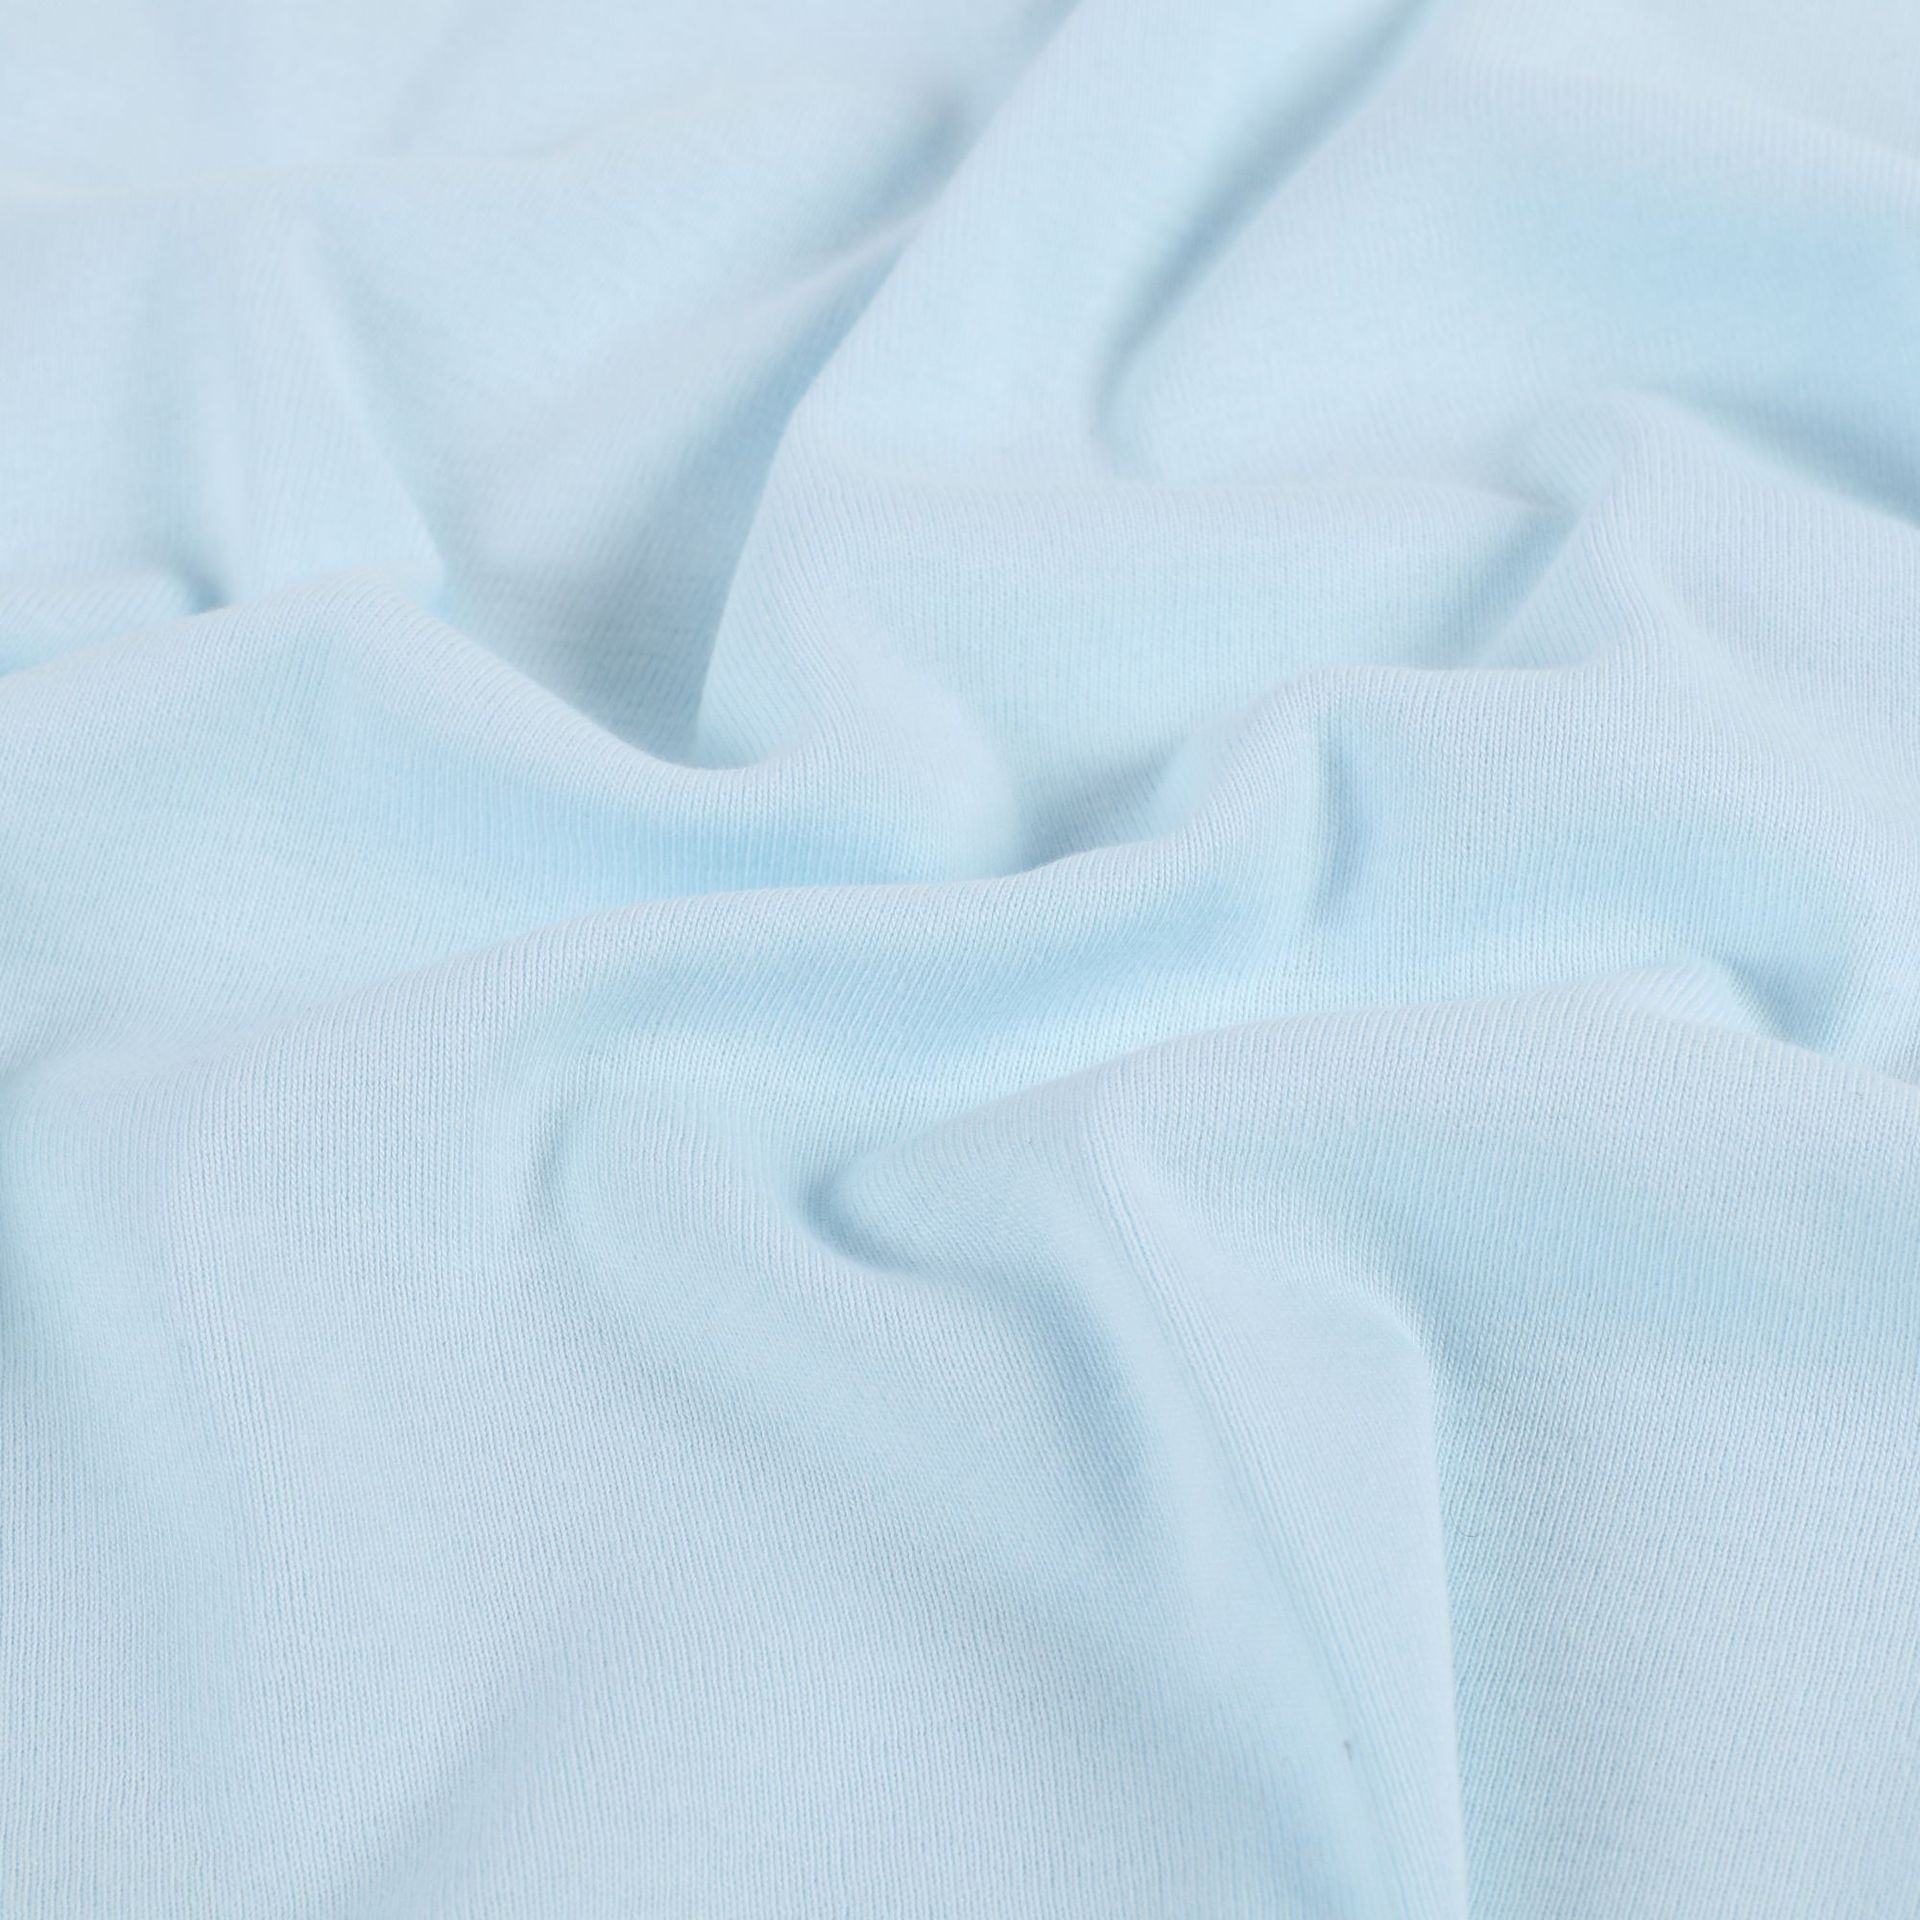 1*1 Rib Spandex or Polyester Knitted Fabric  